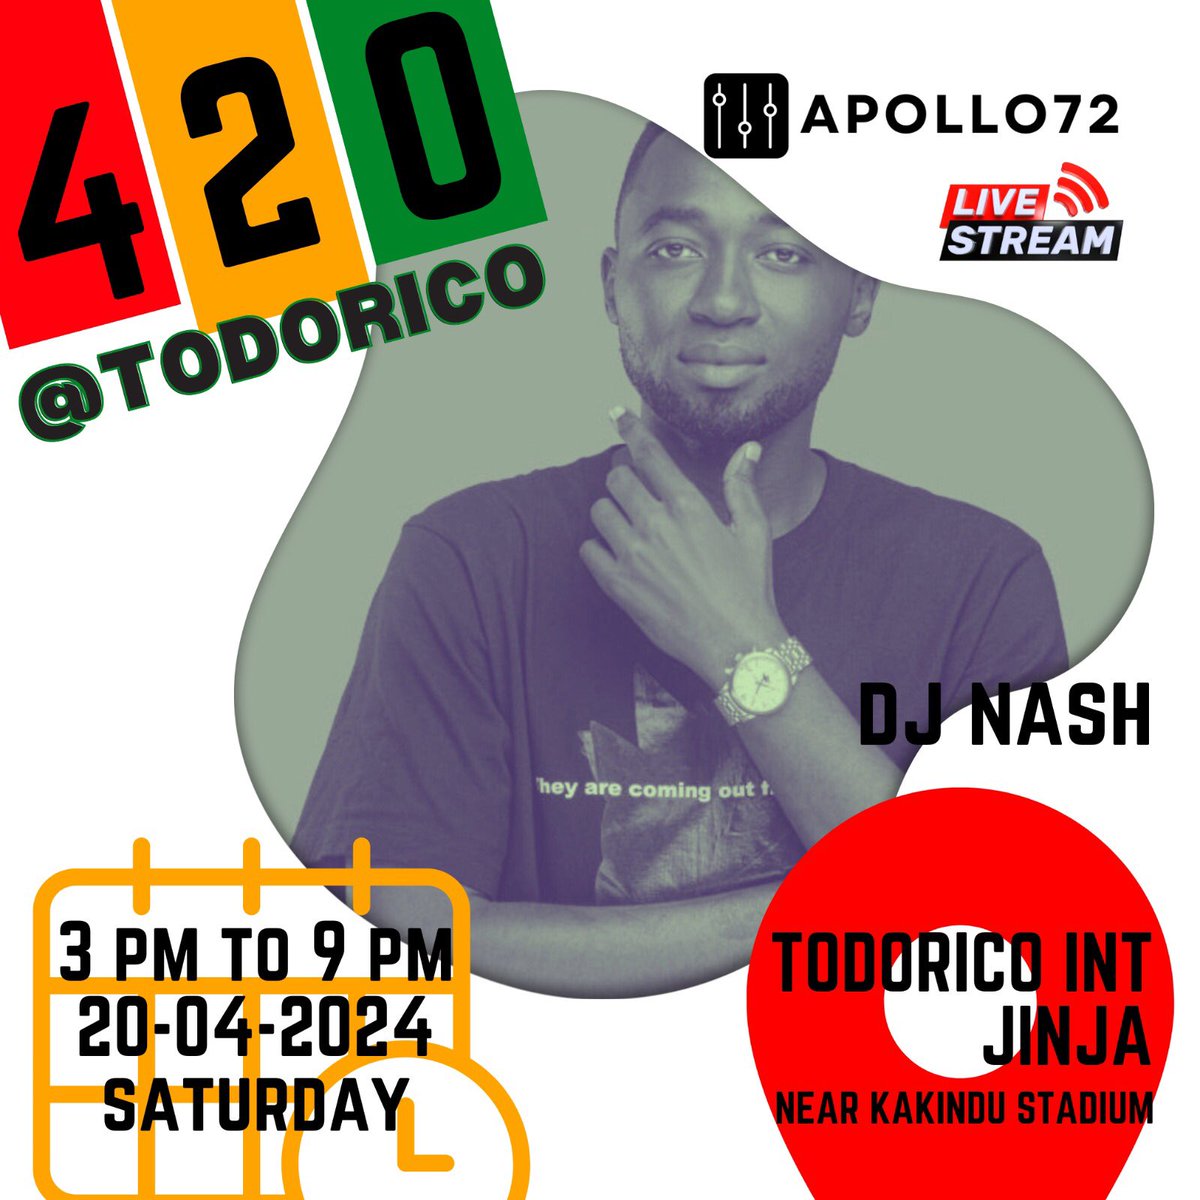 This Saturday we head to Jinja for #420AtTodorico for an easy easy reggae themed upful party. 4 selectors. Kick of time is 3pm. Imagine 420ing by the riverside. Transportation to and from at 20K. Let us light Jinja up.